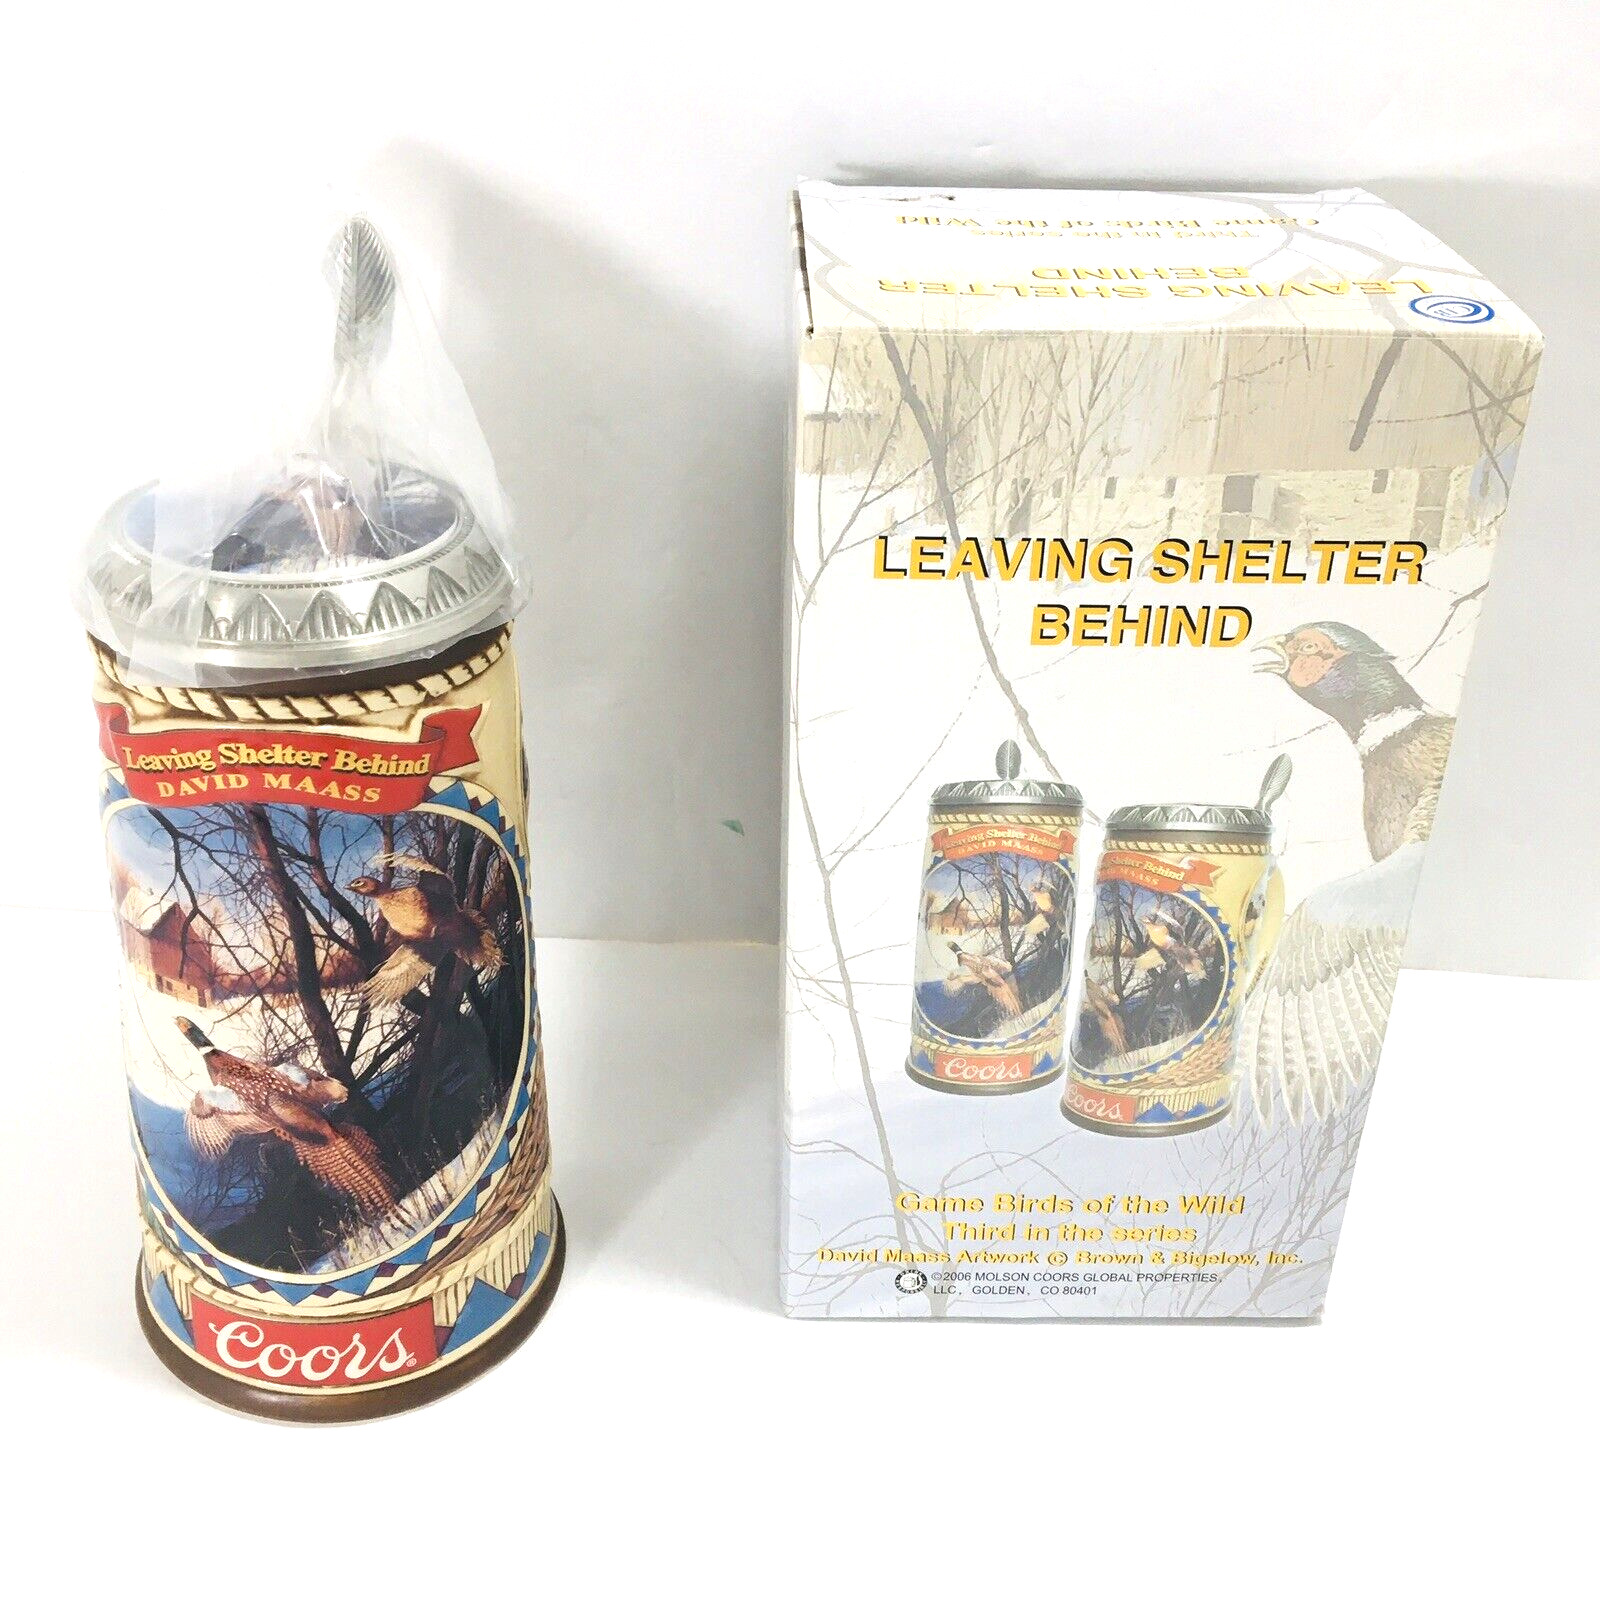 COORS Beer Stein Game Birds of the Wild Leaving Shelter Behind NEW